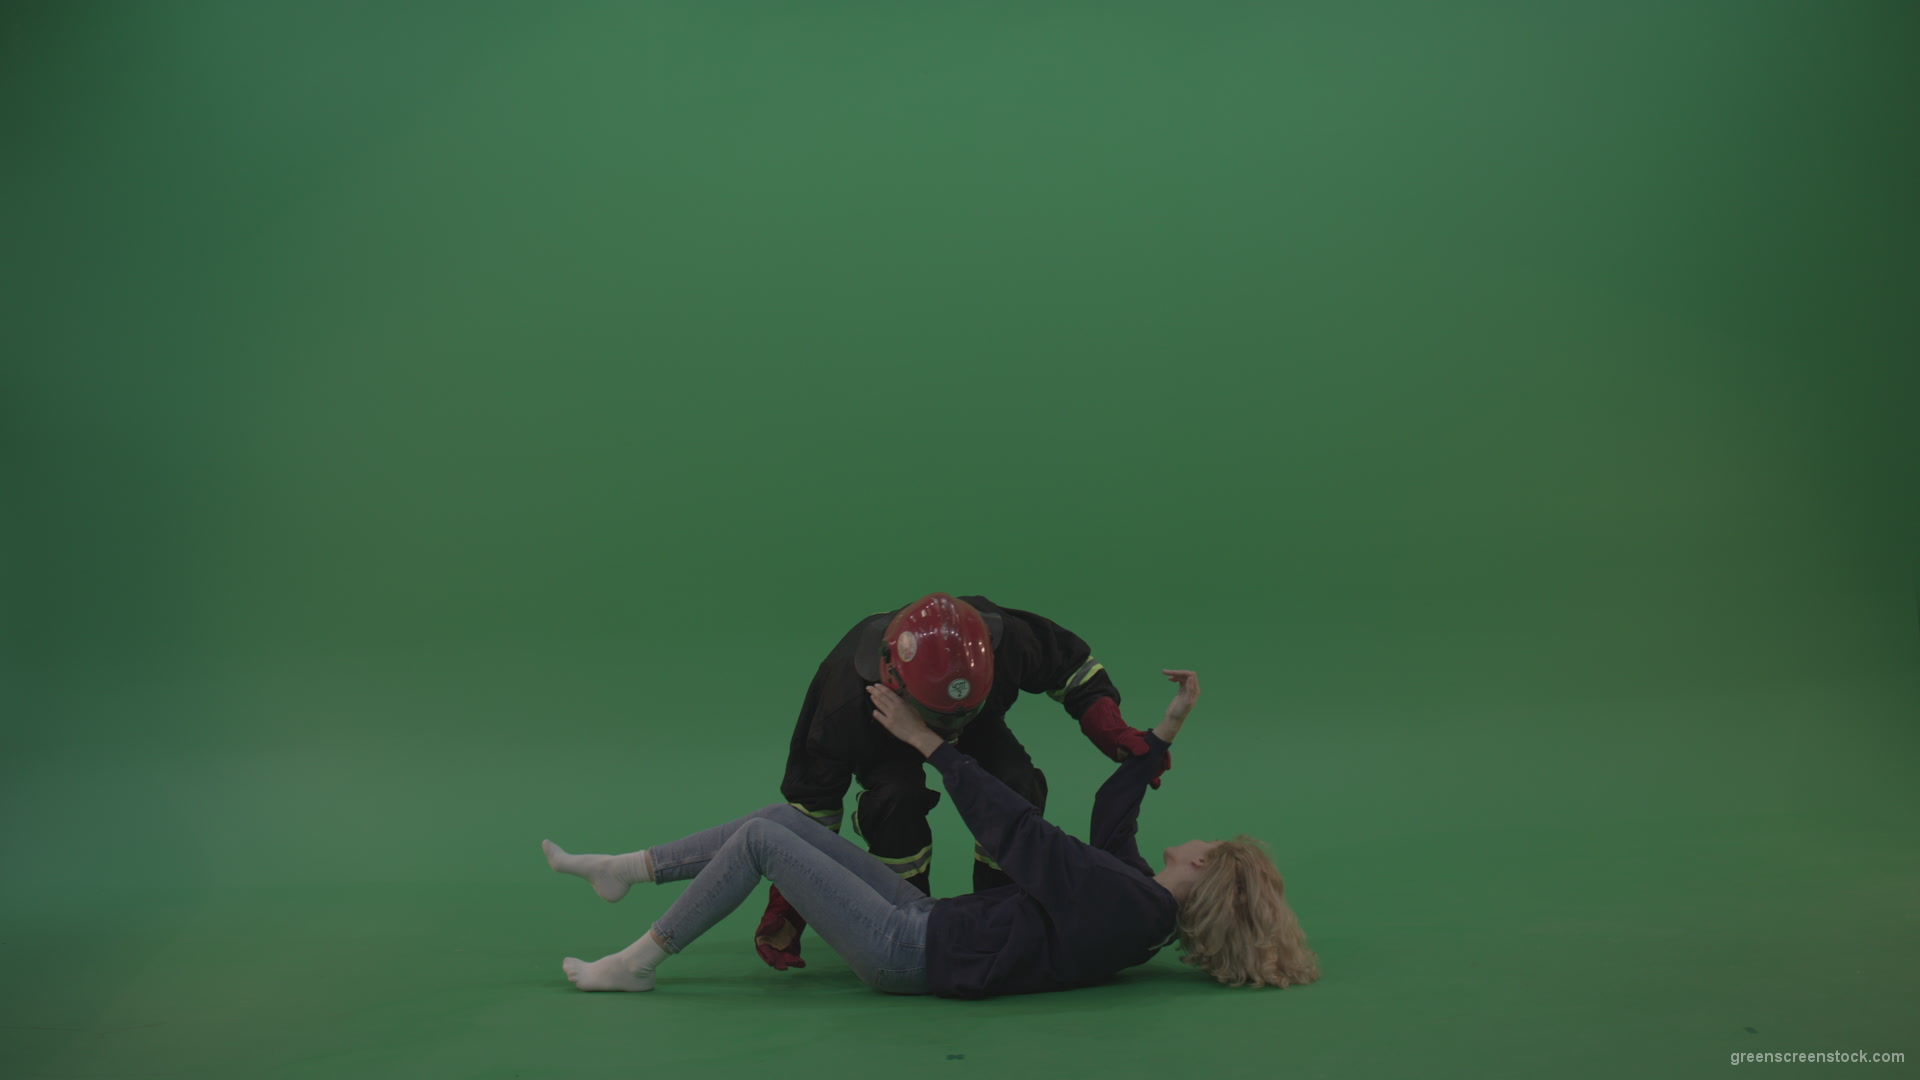 Brave_Fireman_Runs_To_Victim_Girl_Lying_On_The_Groung_Takes_Her_On_His_Strong_Hands_And_Carry_To_The_Safe_Place_On_Green_Screen_Wall_Background_005 Green Screen Stock